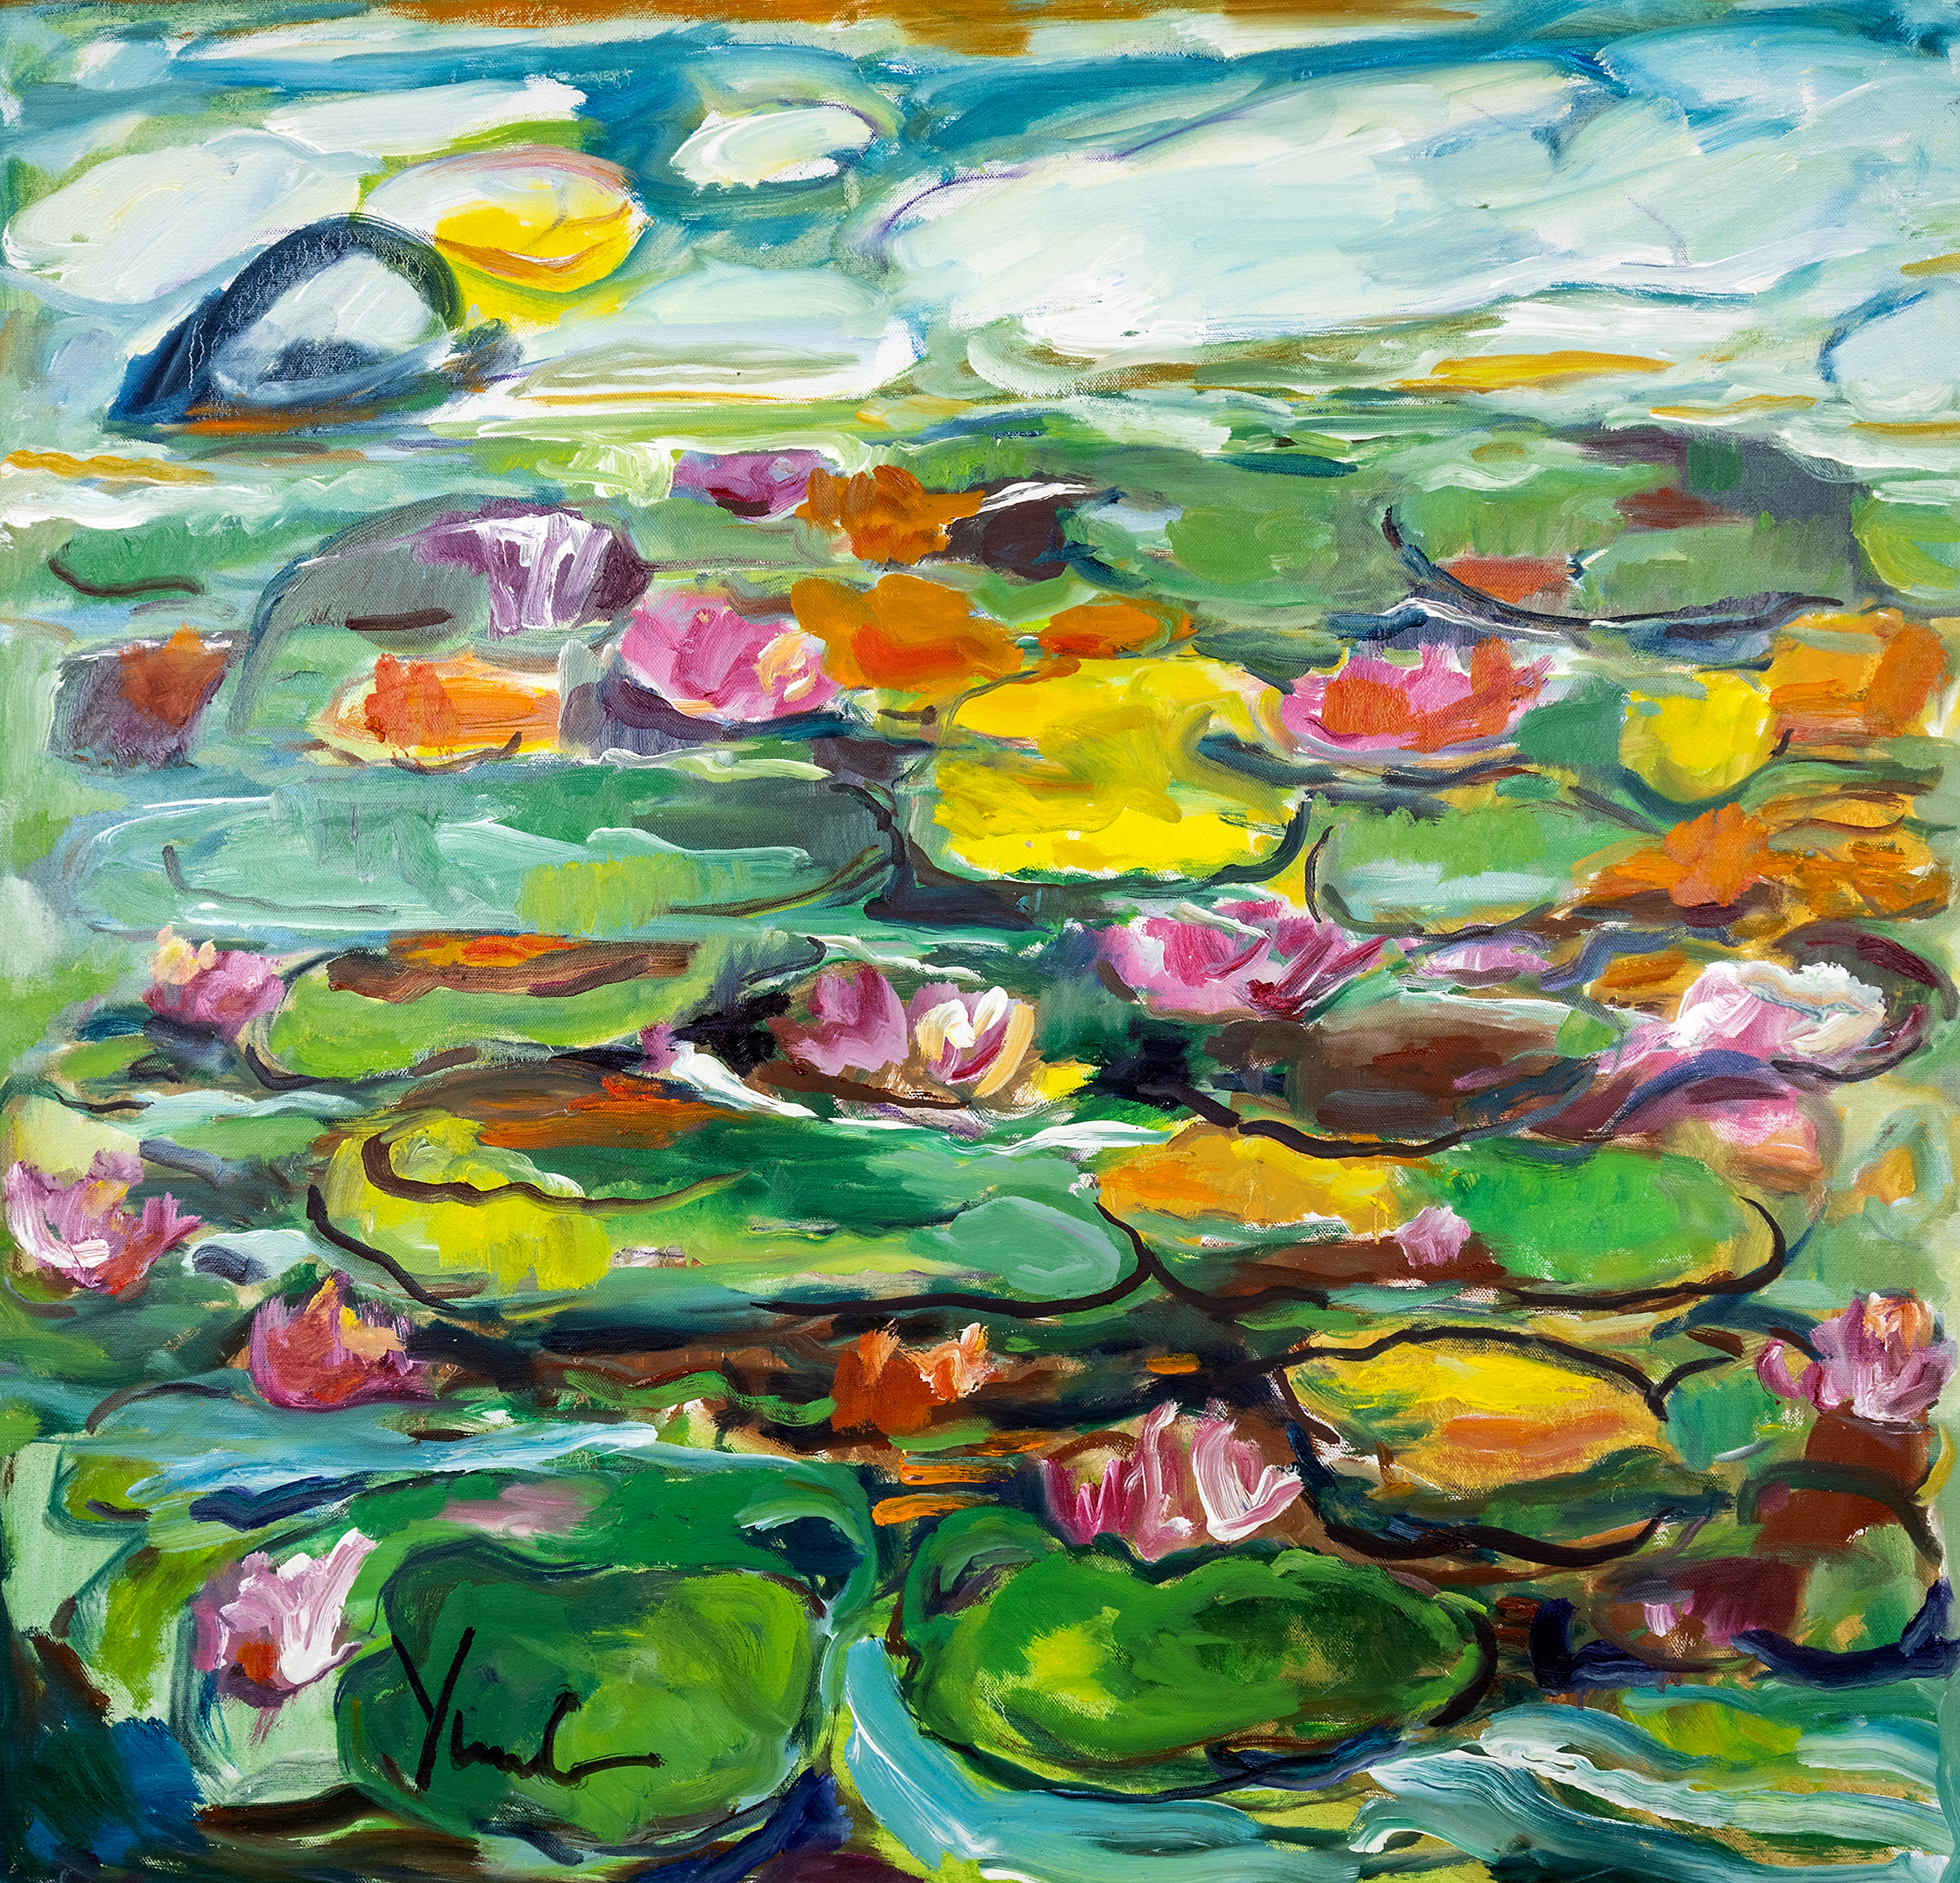 Dorothy Yung - LILIES - Oil on canvas - 2021